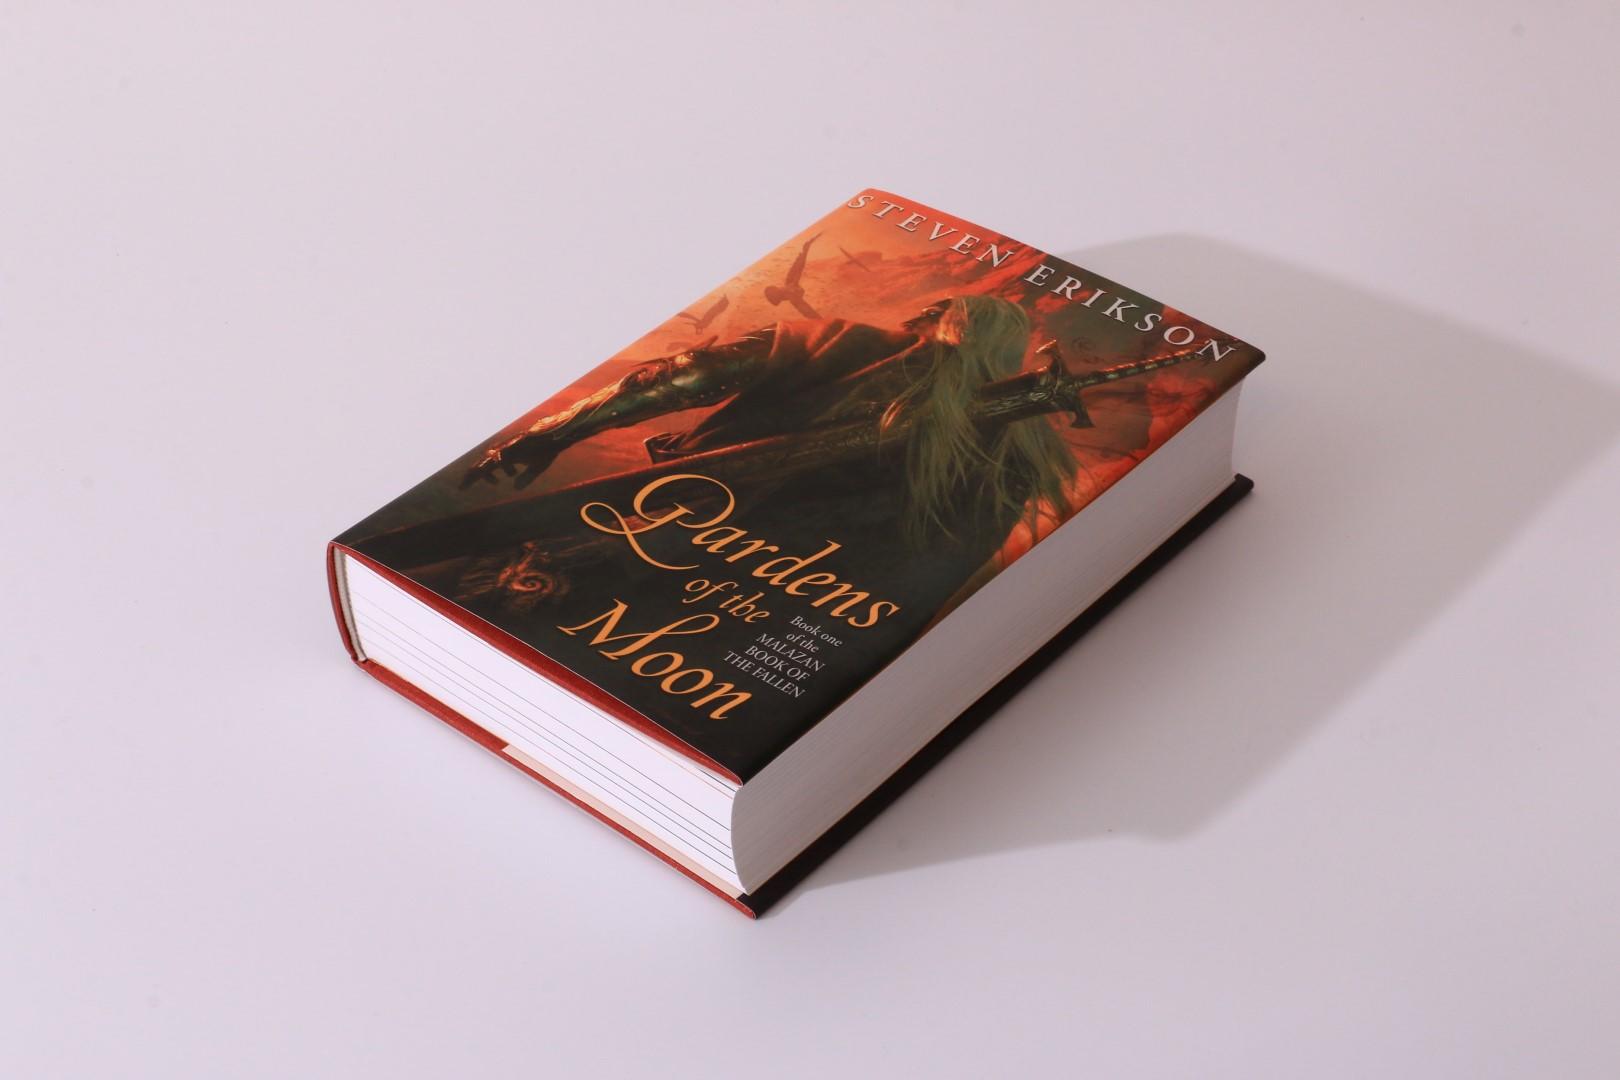 Steven Erikson - Gardens of the Moon - Subterranean Press, 2009, Signed Limited Edition.